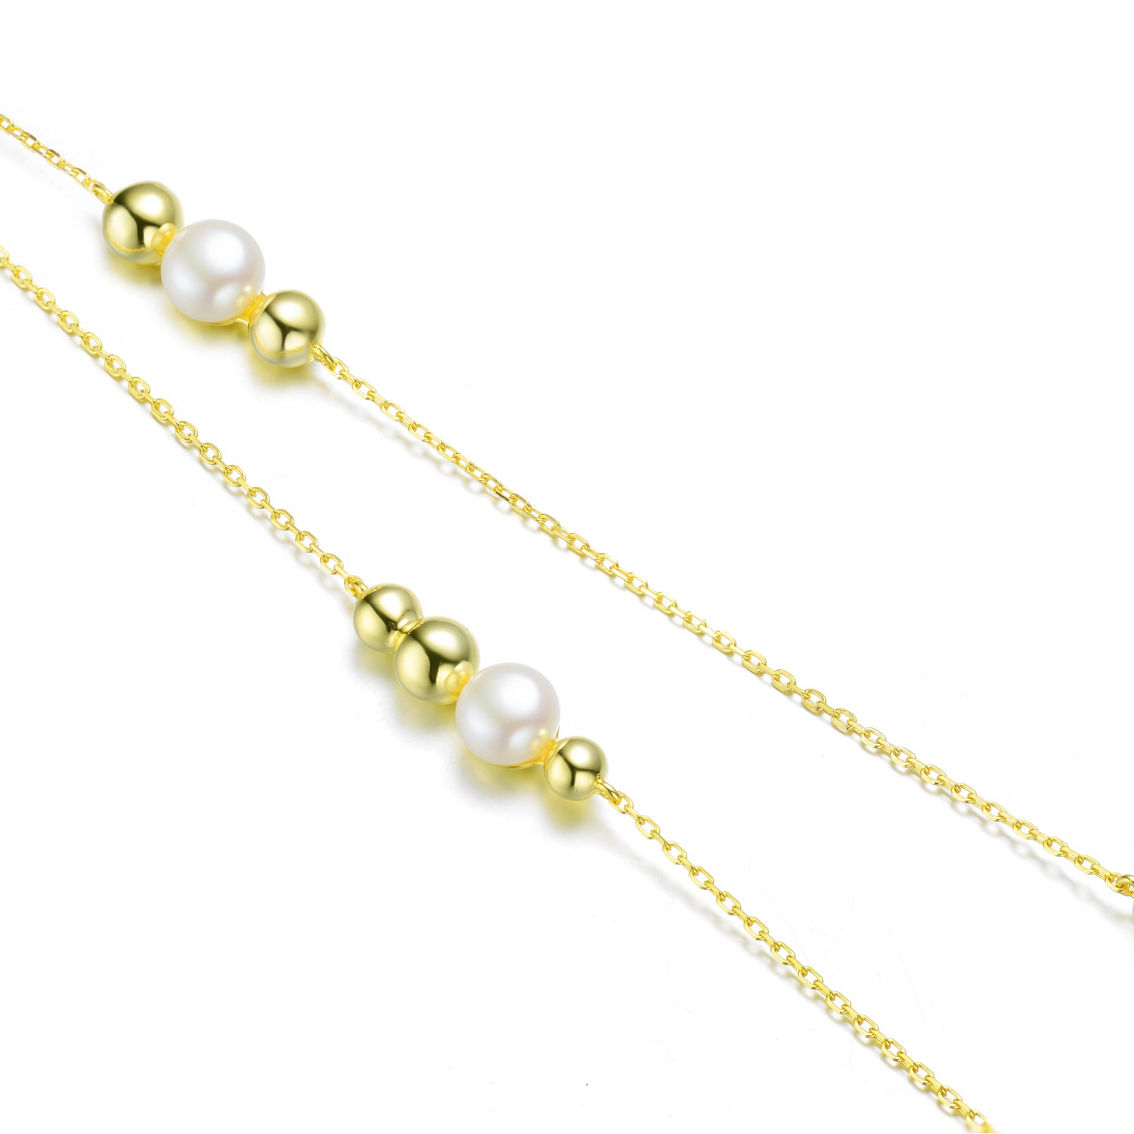 Gold Plating and Genuine Freshwater Pearl Station Necklace - Image 2 of 3